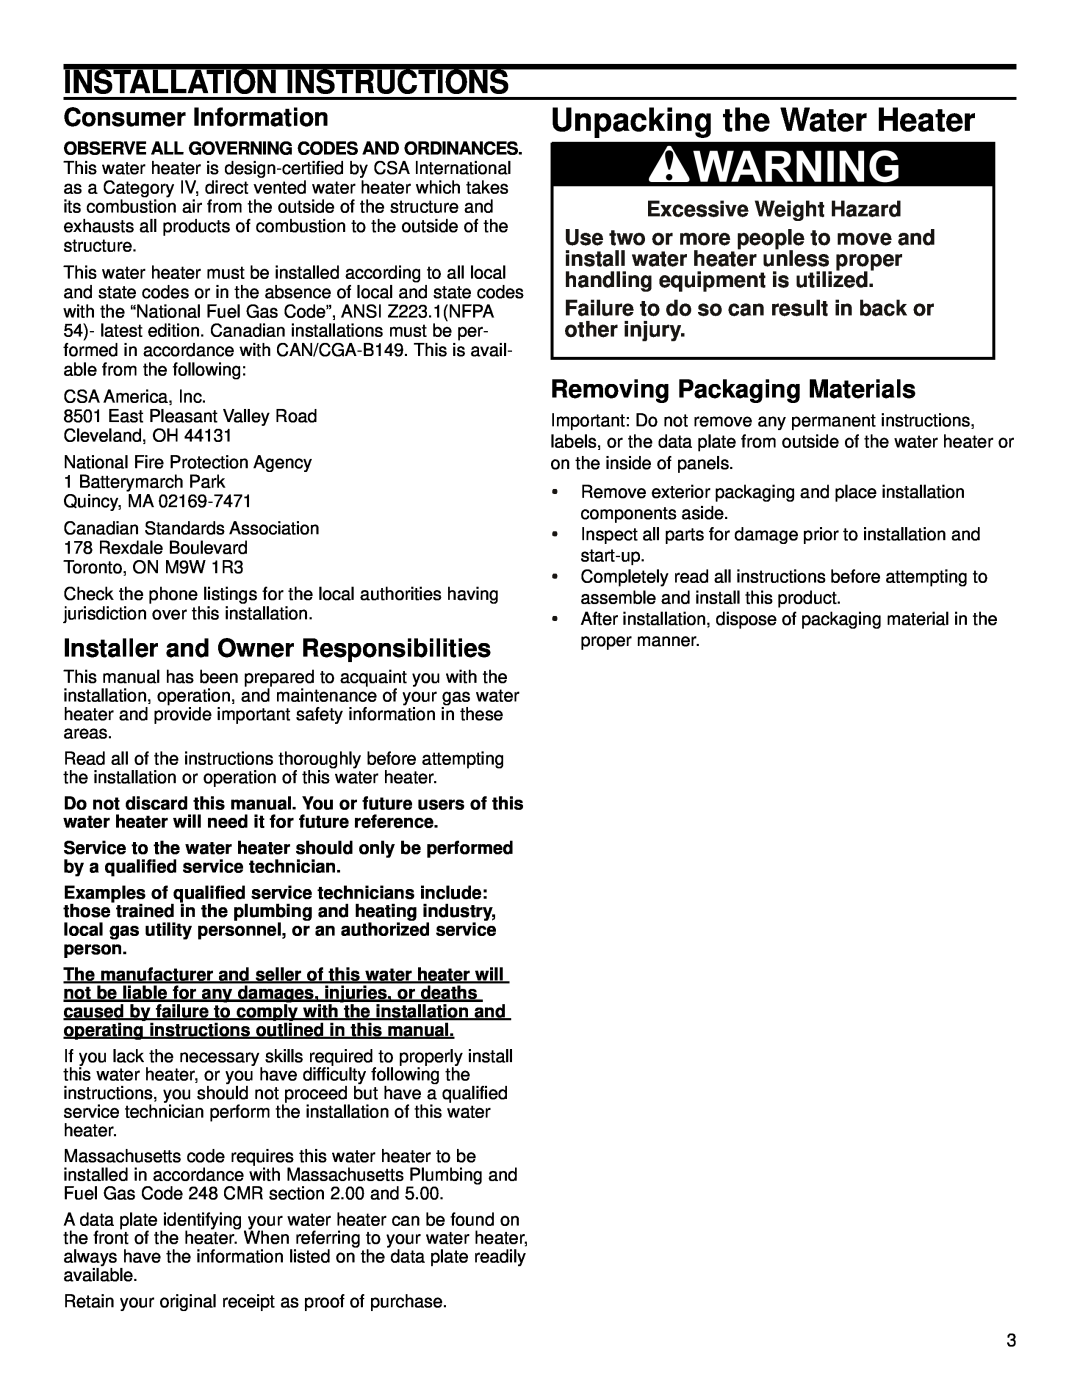 American International PR 150-34 2NV or 2PV Installation Instructions, Unpacking the Water Heater, Consumer Information 